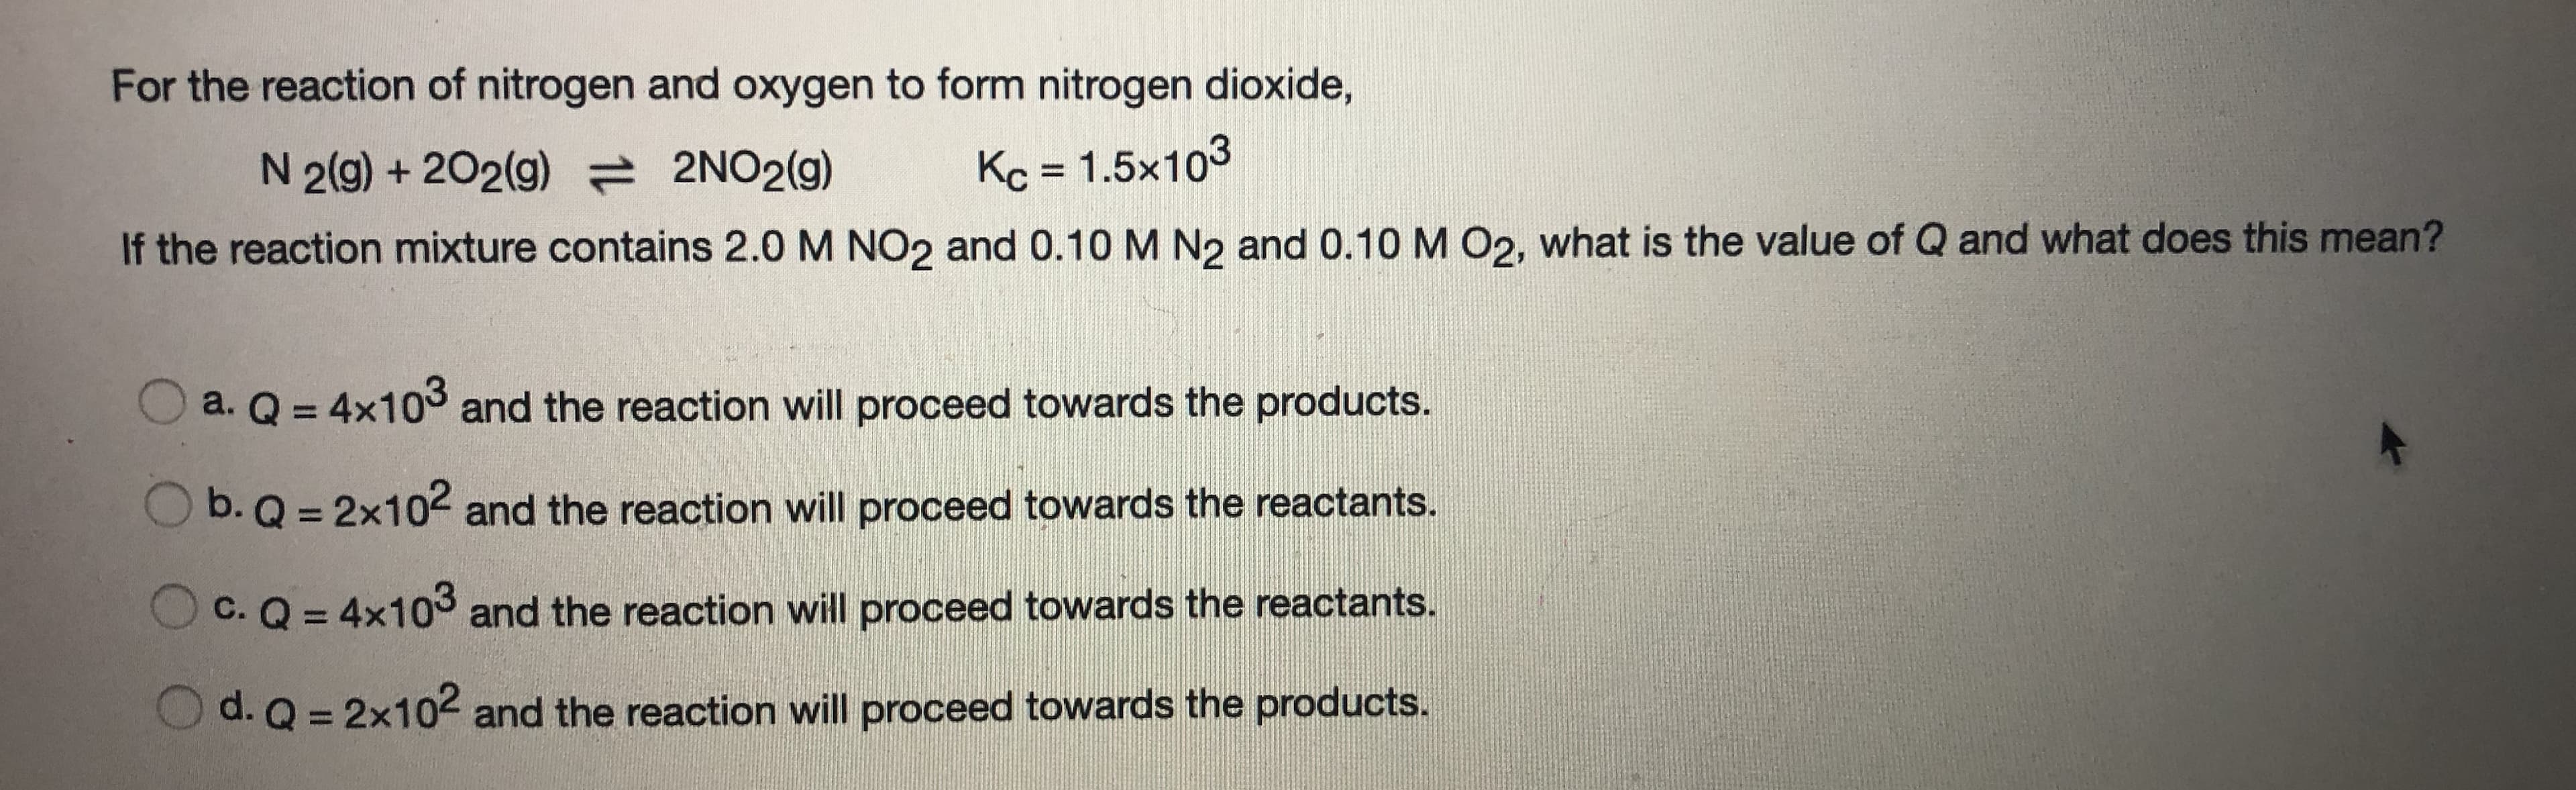 For the reaction of nitrogen and oxygen to form nitrogen dioxide,
Kc = 1.5x103
N 2(g) + 202(g) 2NO2(g)
If the reaction mixture contains 2.0 M NO2 and 0.10 M N2 and 0.10 M O2, what is the value of Q and what does this mean?
a. Q = 4x103 and the reaction will proceed towards the products.
O b. Q = 2x102 and the reaction will proceed towards the reactants.
c. Q = 4x103 and the reaction will proceed towards the reactants.
O d. Q = 2x102 and the reaction will proceed towards the products.
